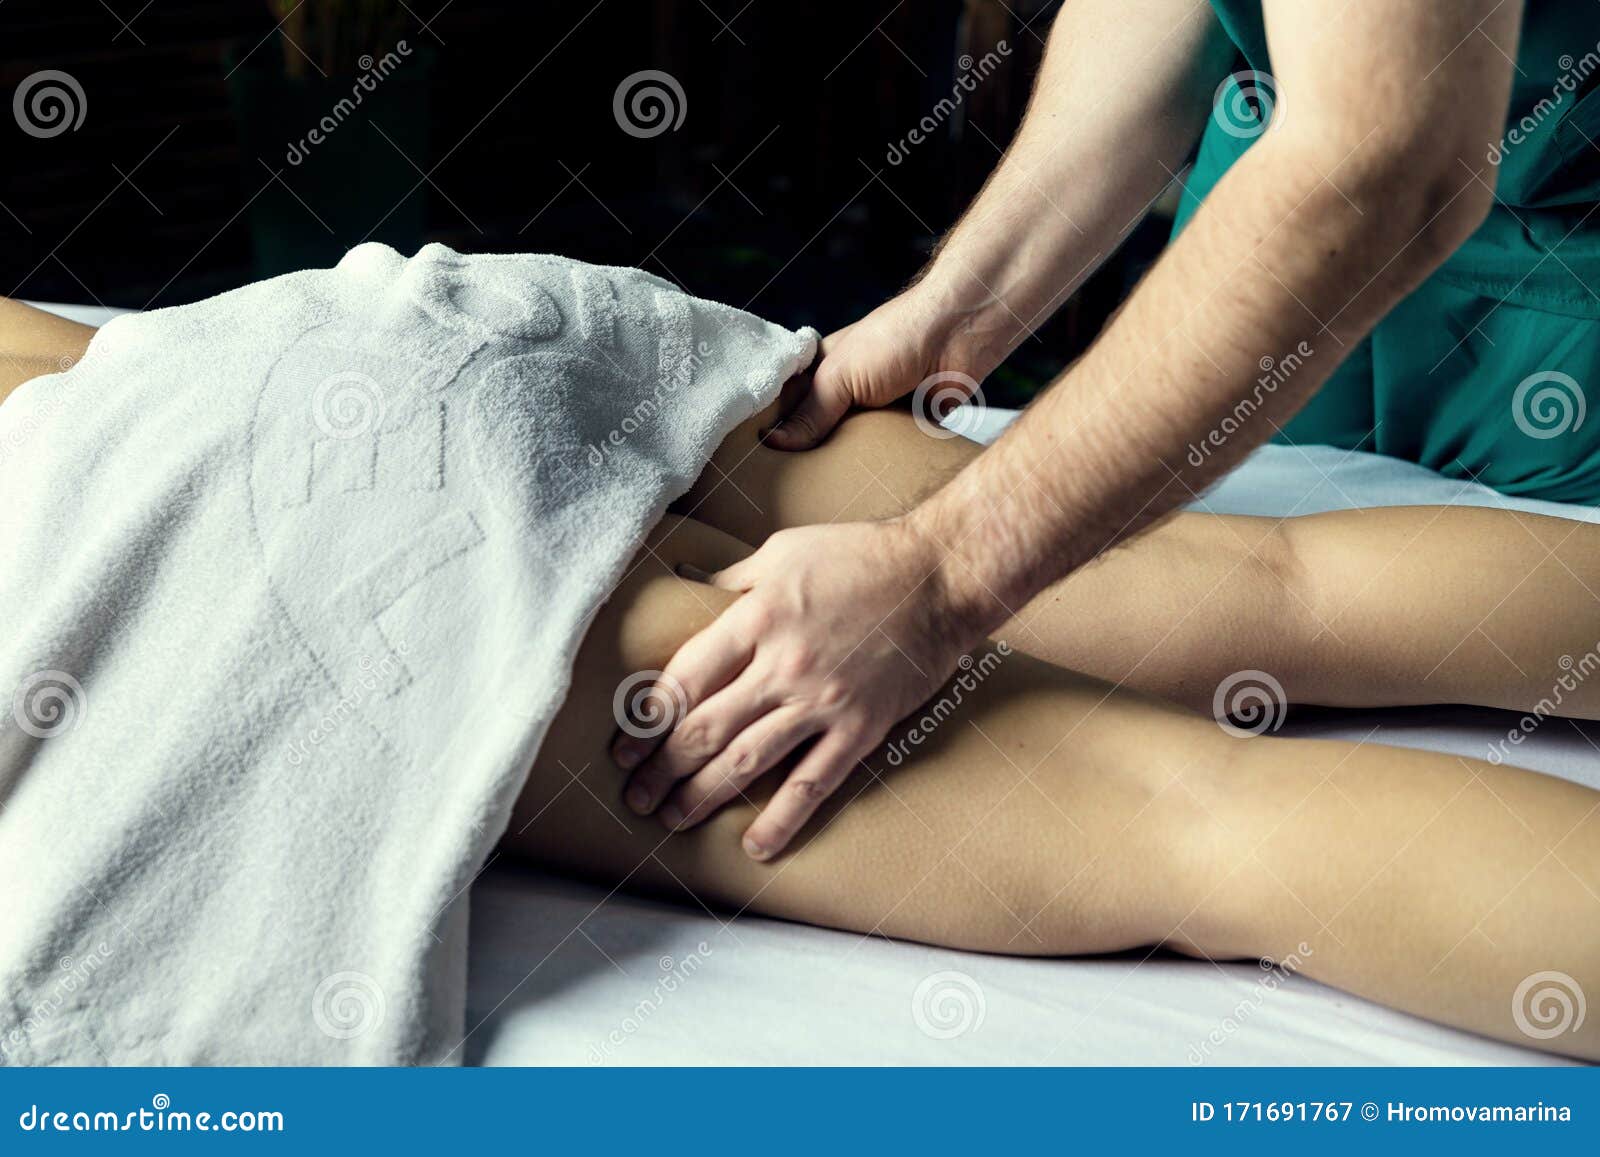 Lymphatic Drainage Massage Of The Hips A Male Massage Th